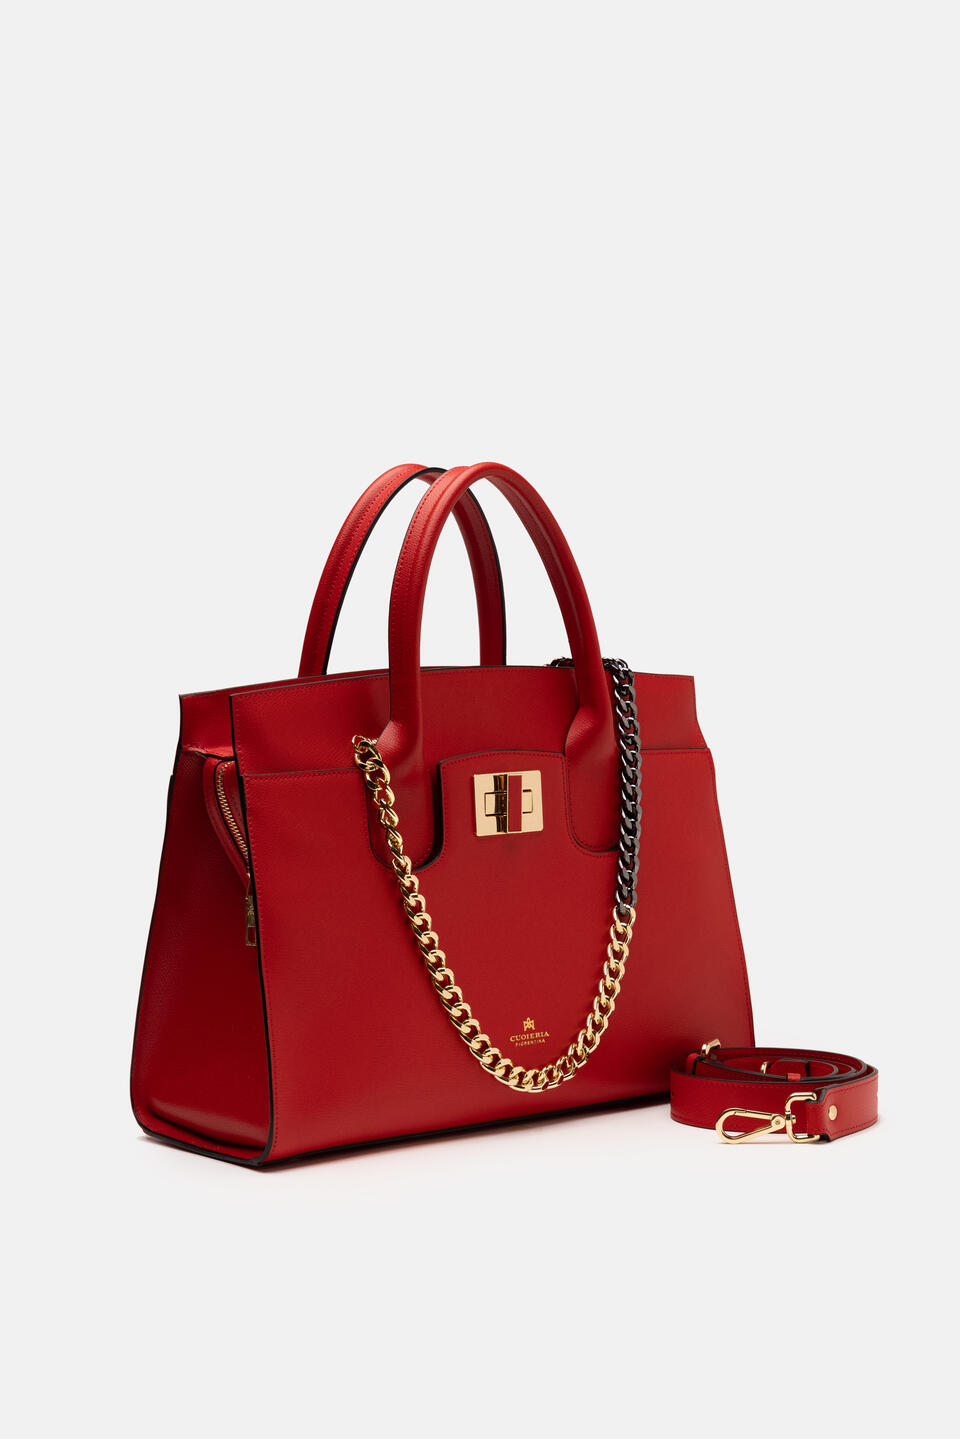 Large tote bag Red  - Tote Bag - Women's Bags - Bags - Cuoieria Fiorentina